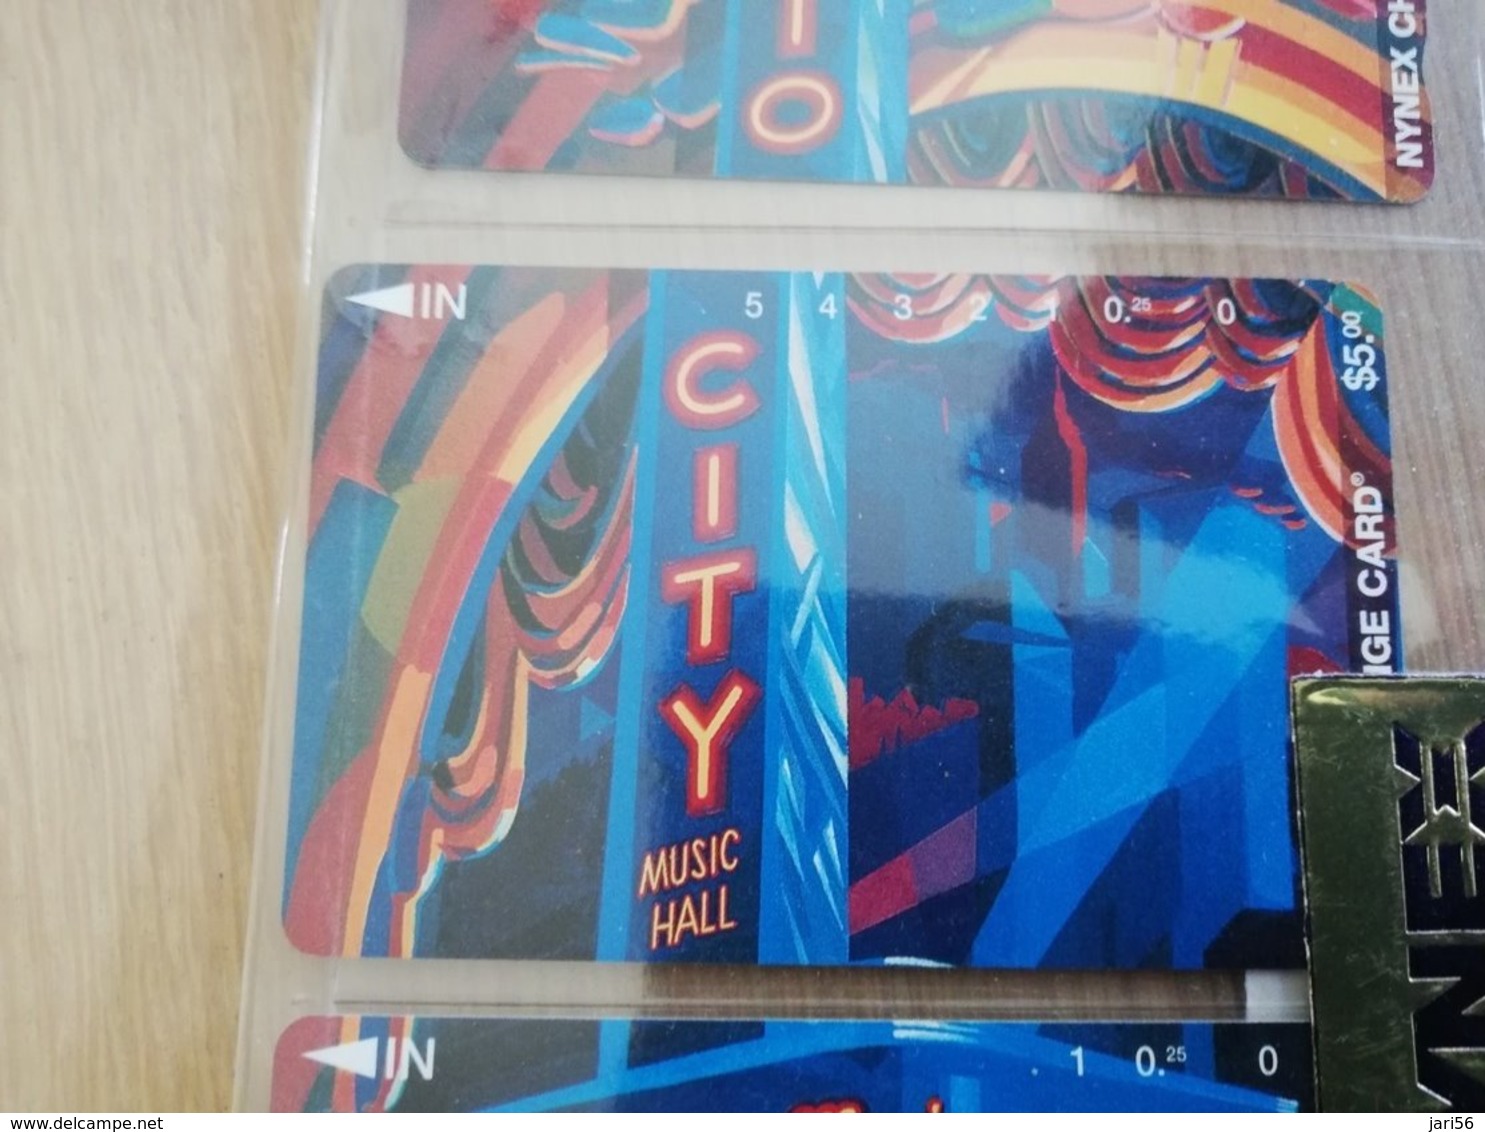 UNITED STATES  NYNEX  TELECARD WORLD 1995 RADIO CITY SEALED   3 CARDS   MINT   LIMITED EDITION ** 1397** - Collezioni